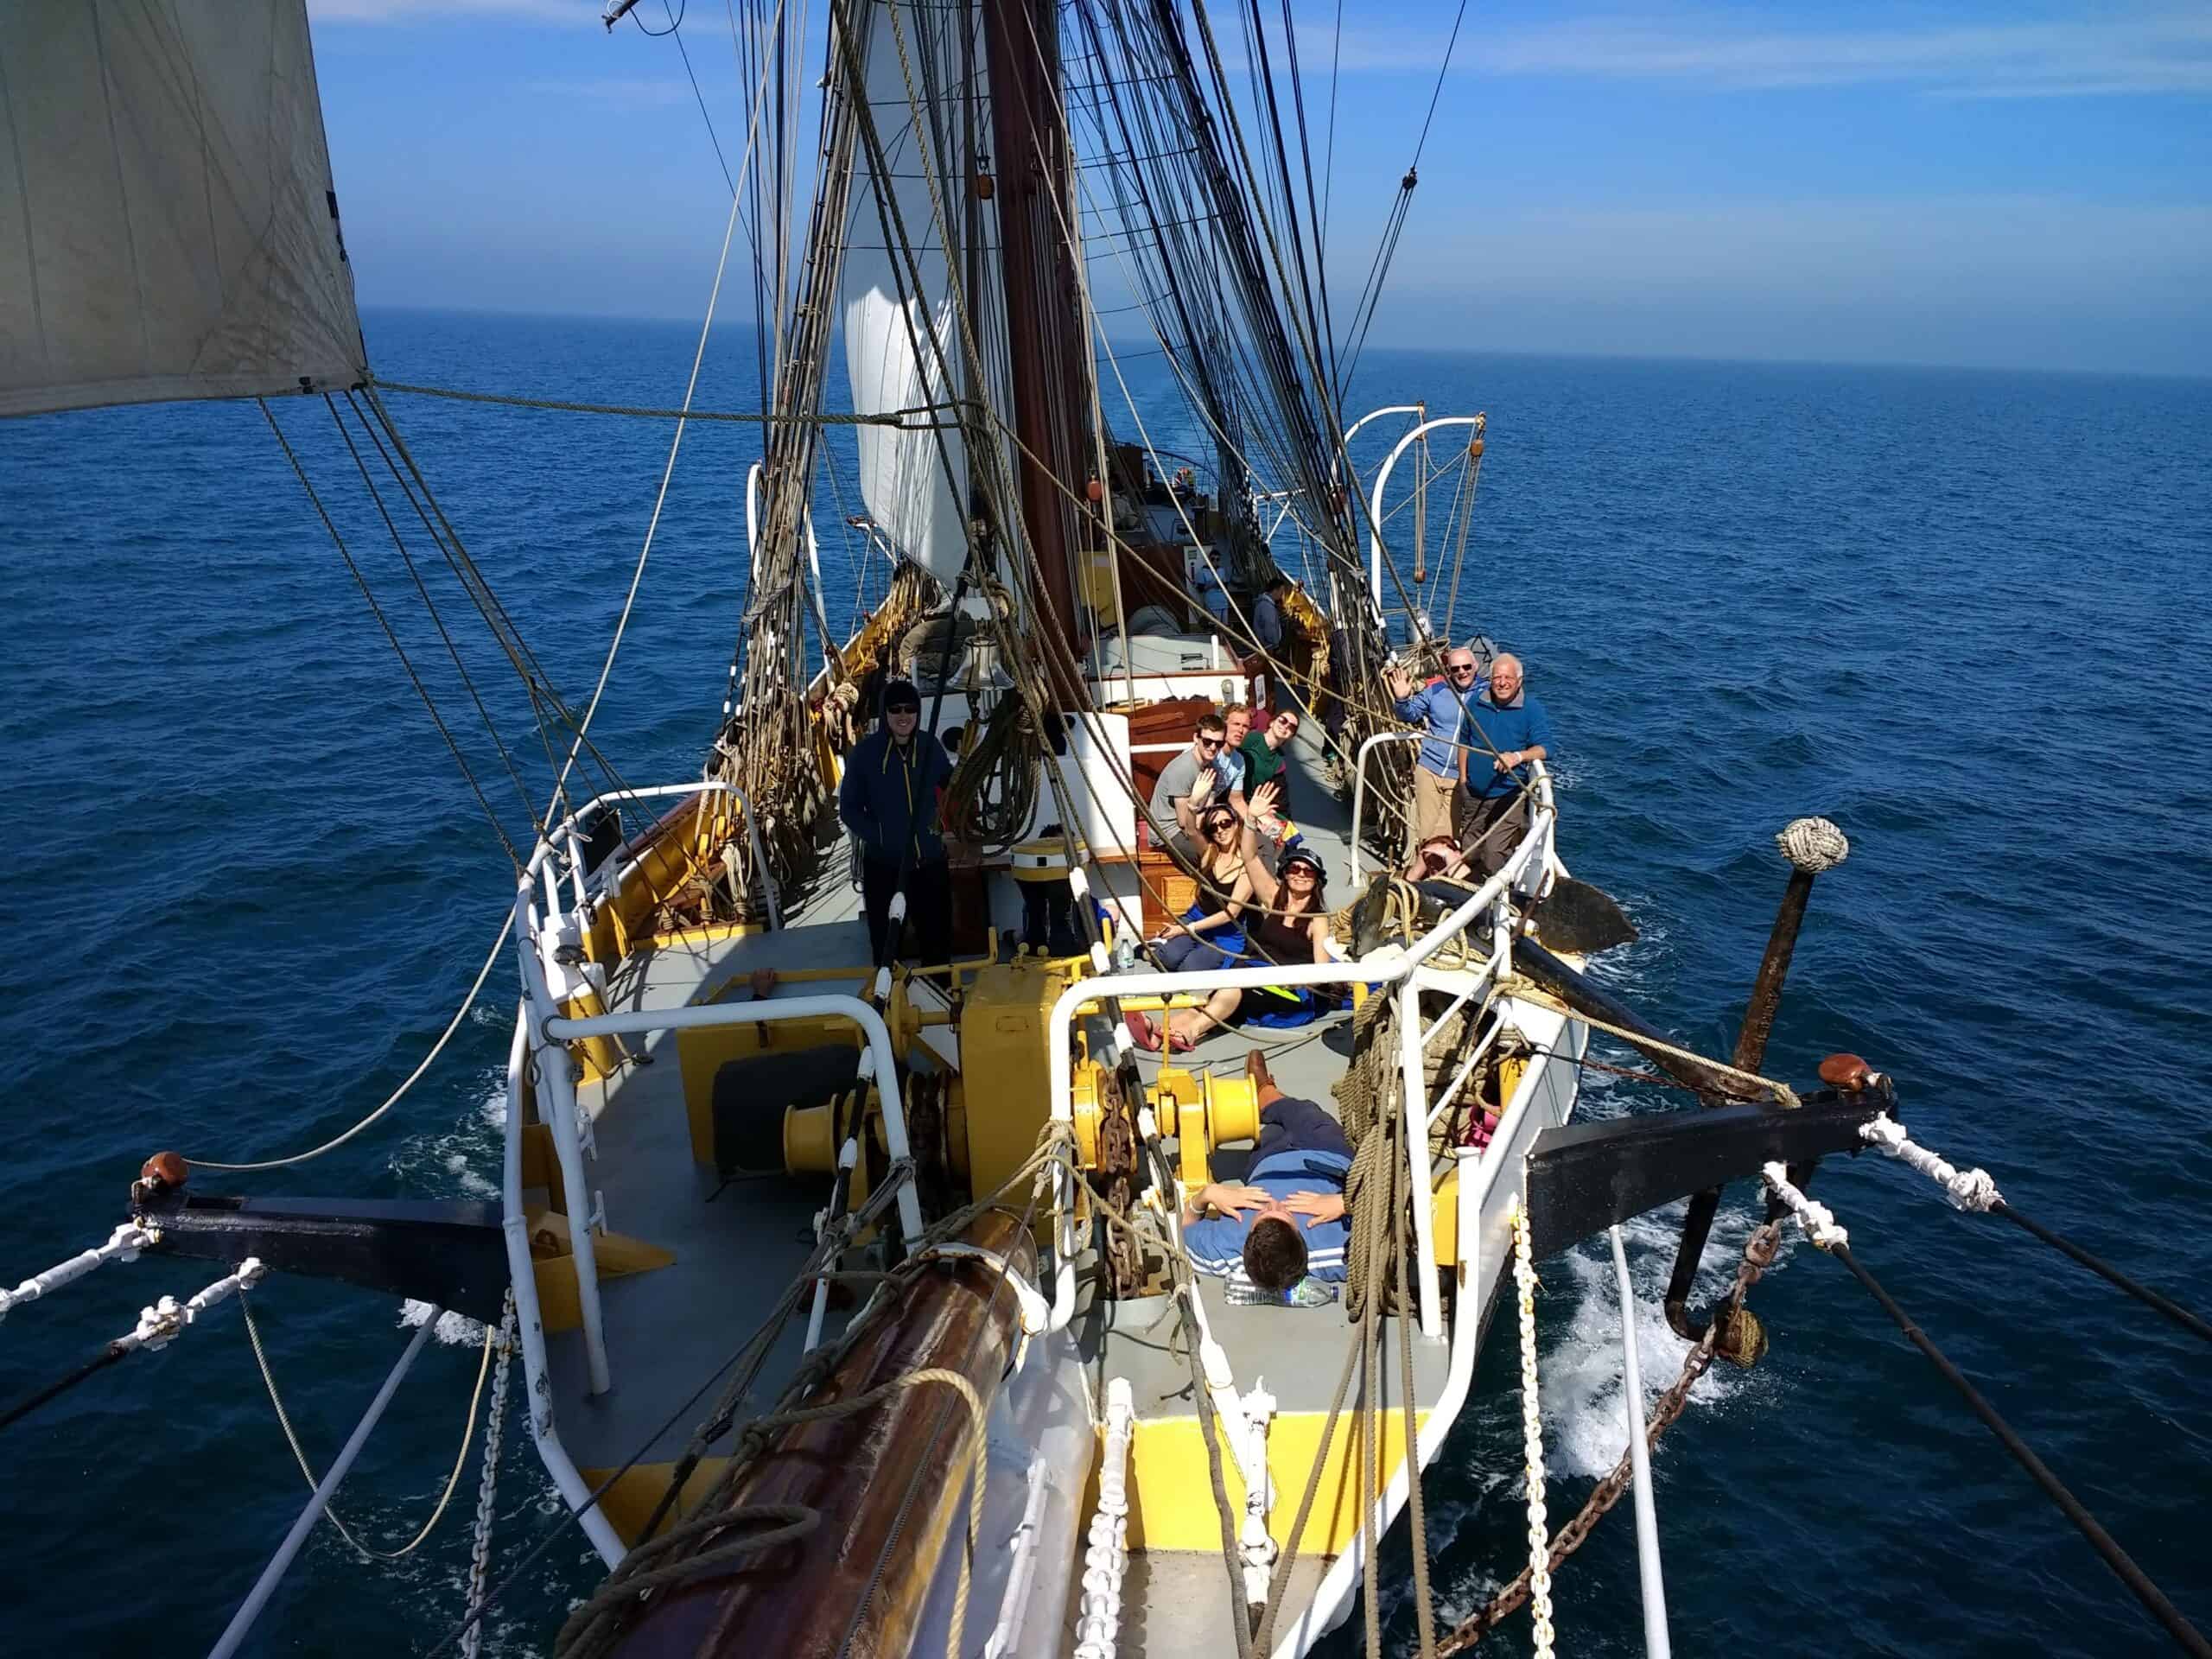 Going out on the bowsprit gives you a great perspective of the rest of the ship!